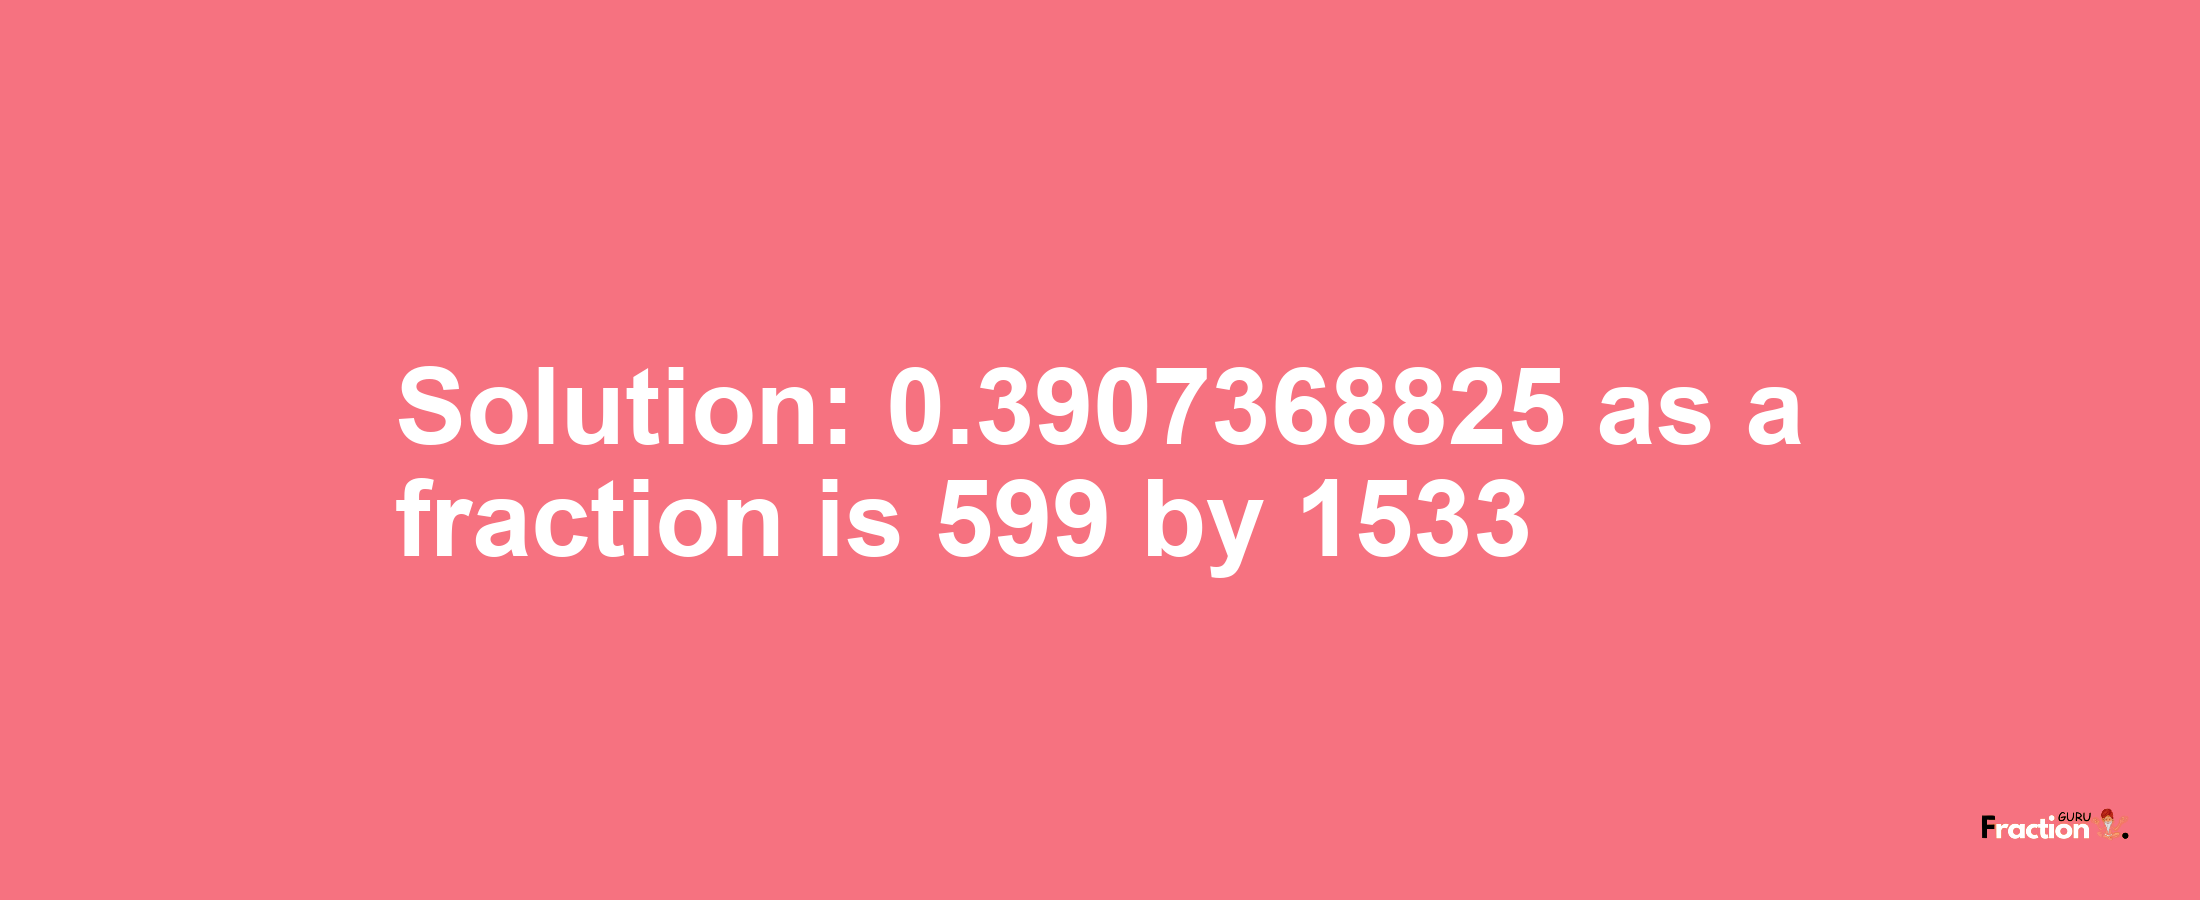 Solution:0.3907368825 as a fraction is 599/1533